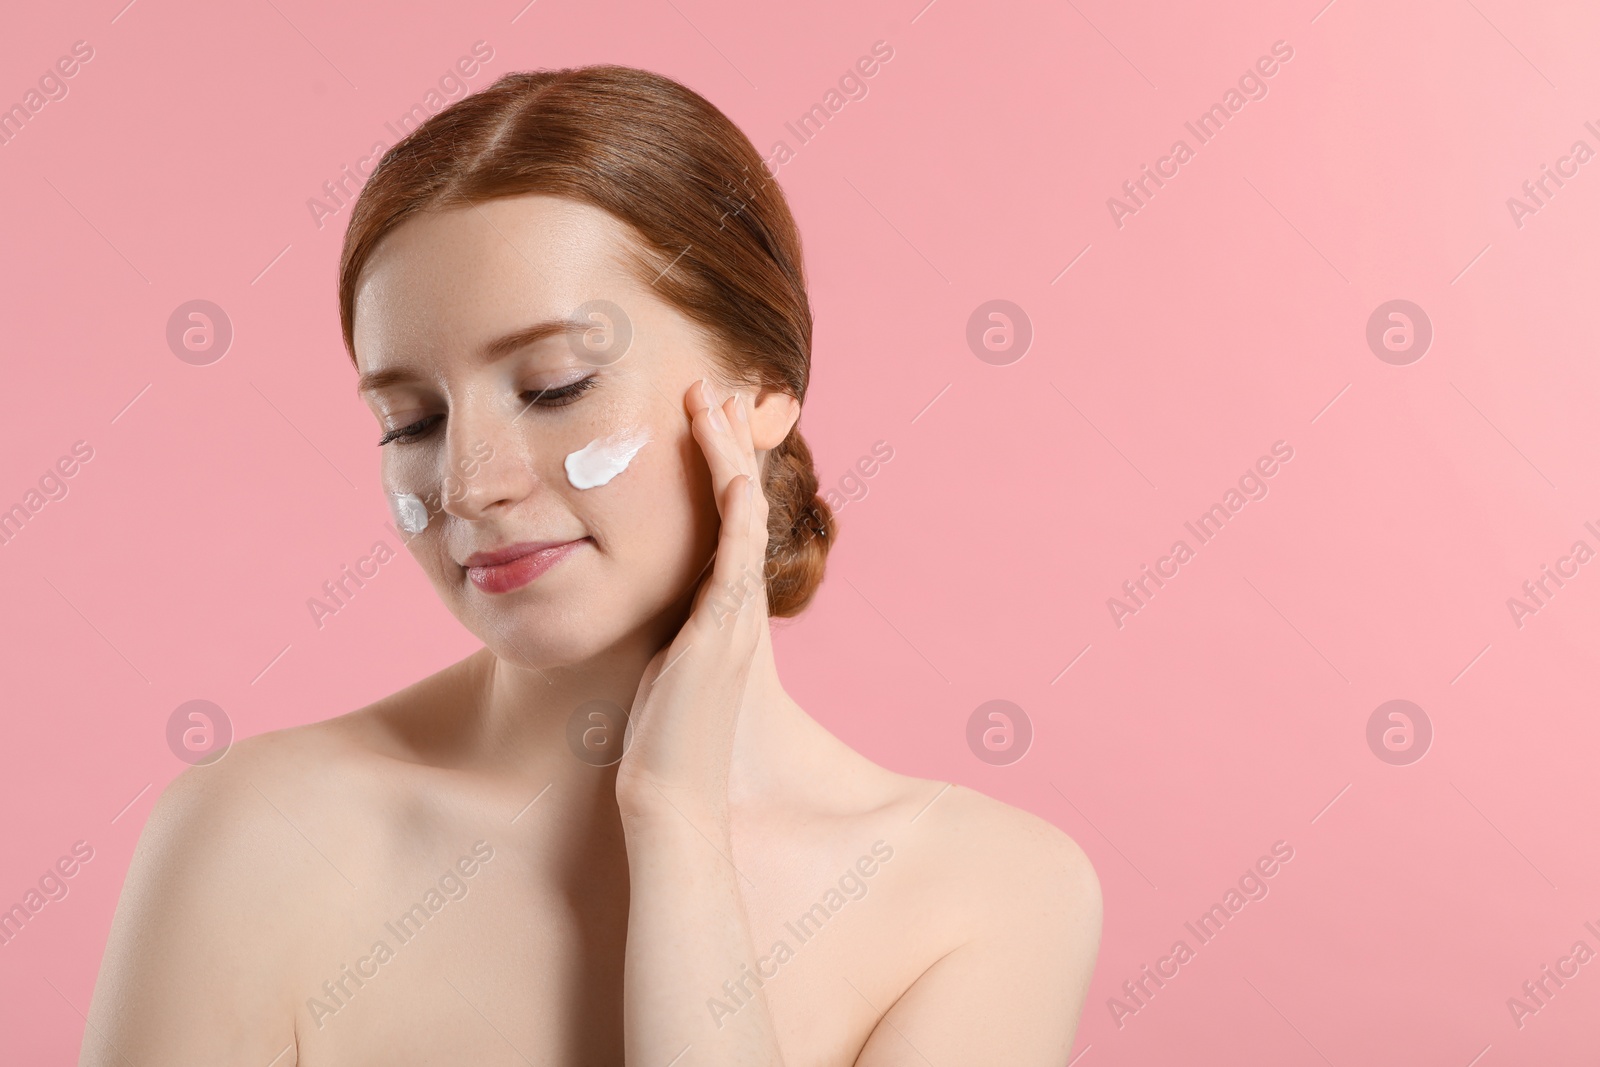 Photo of Beautiful woman with freckles and cream on her face against pink background. Space for text